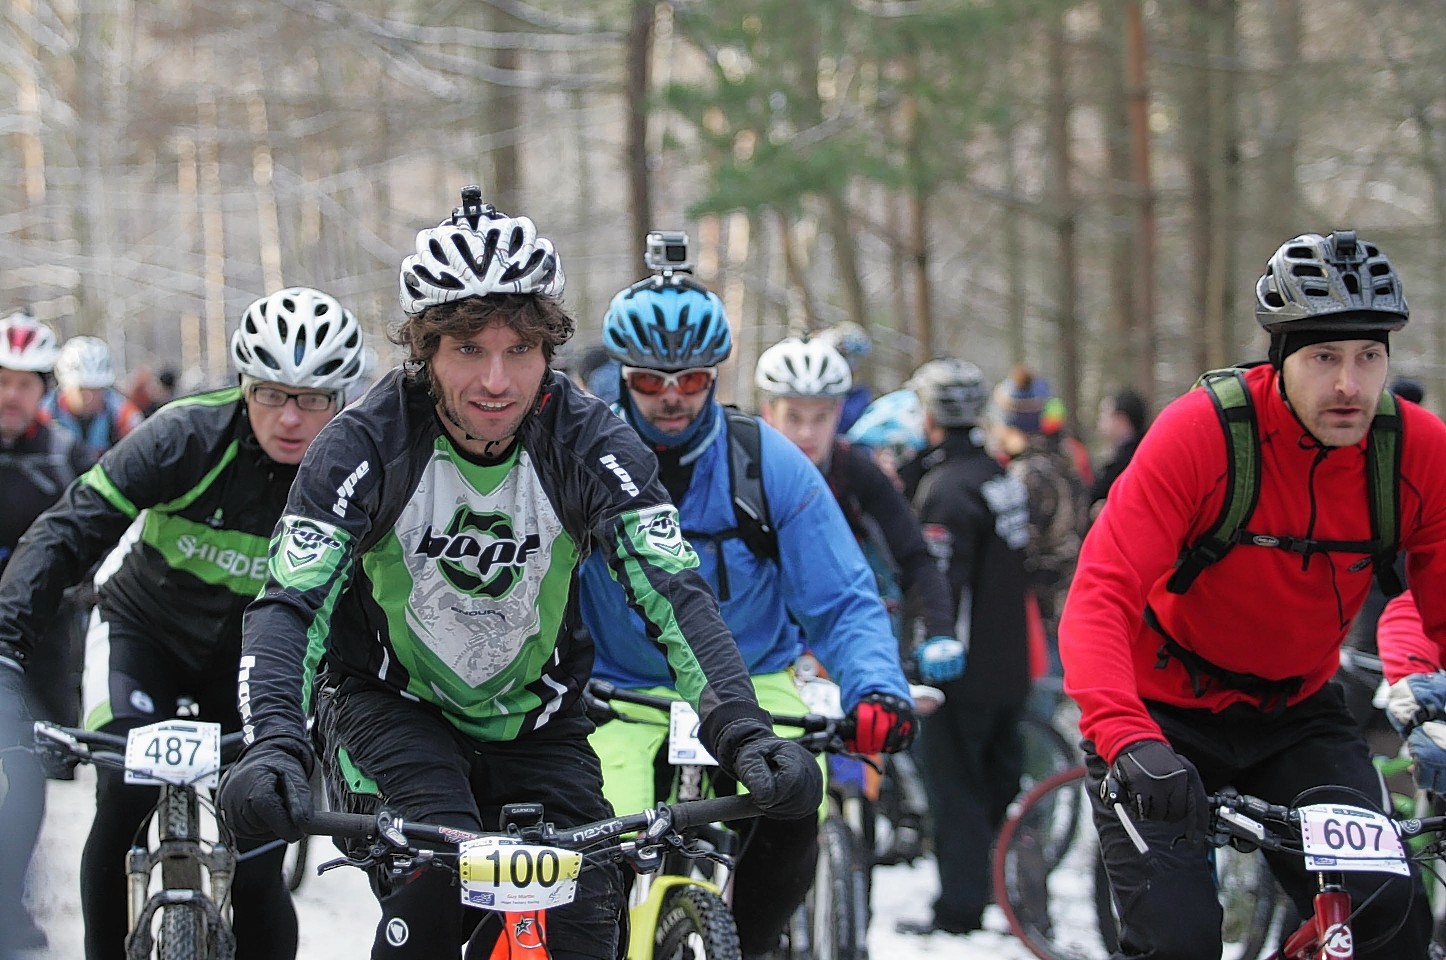 Over 700 people took part in the Strathpuffer 24-hour contest 